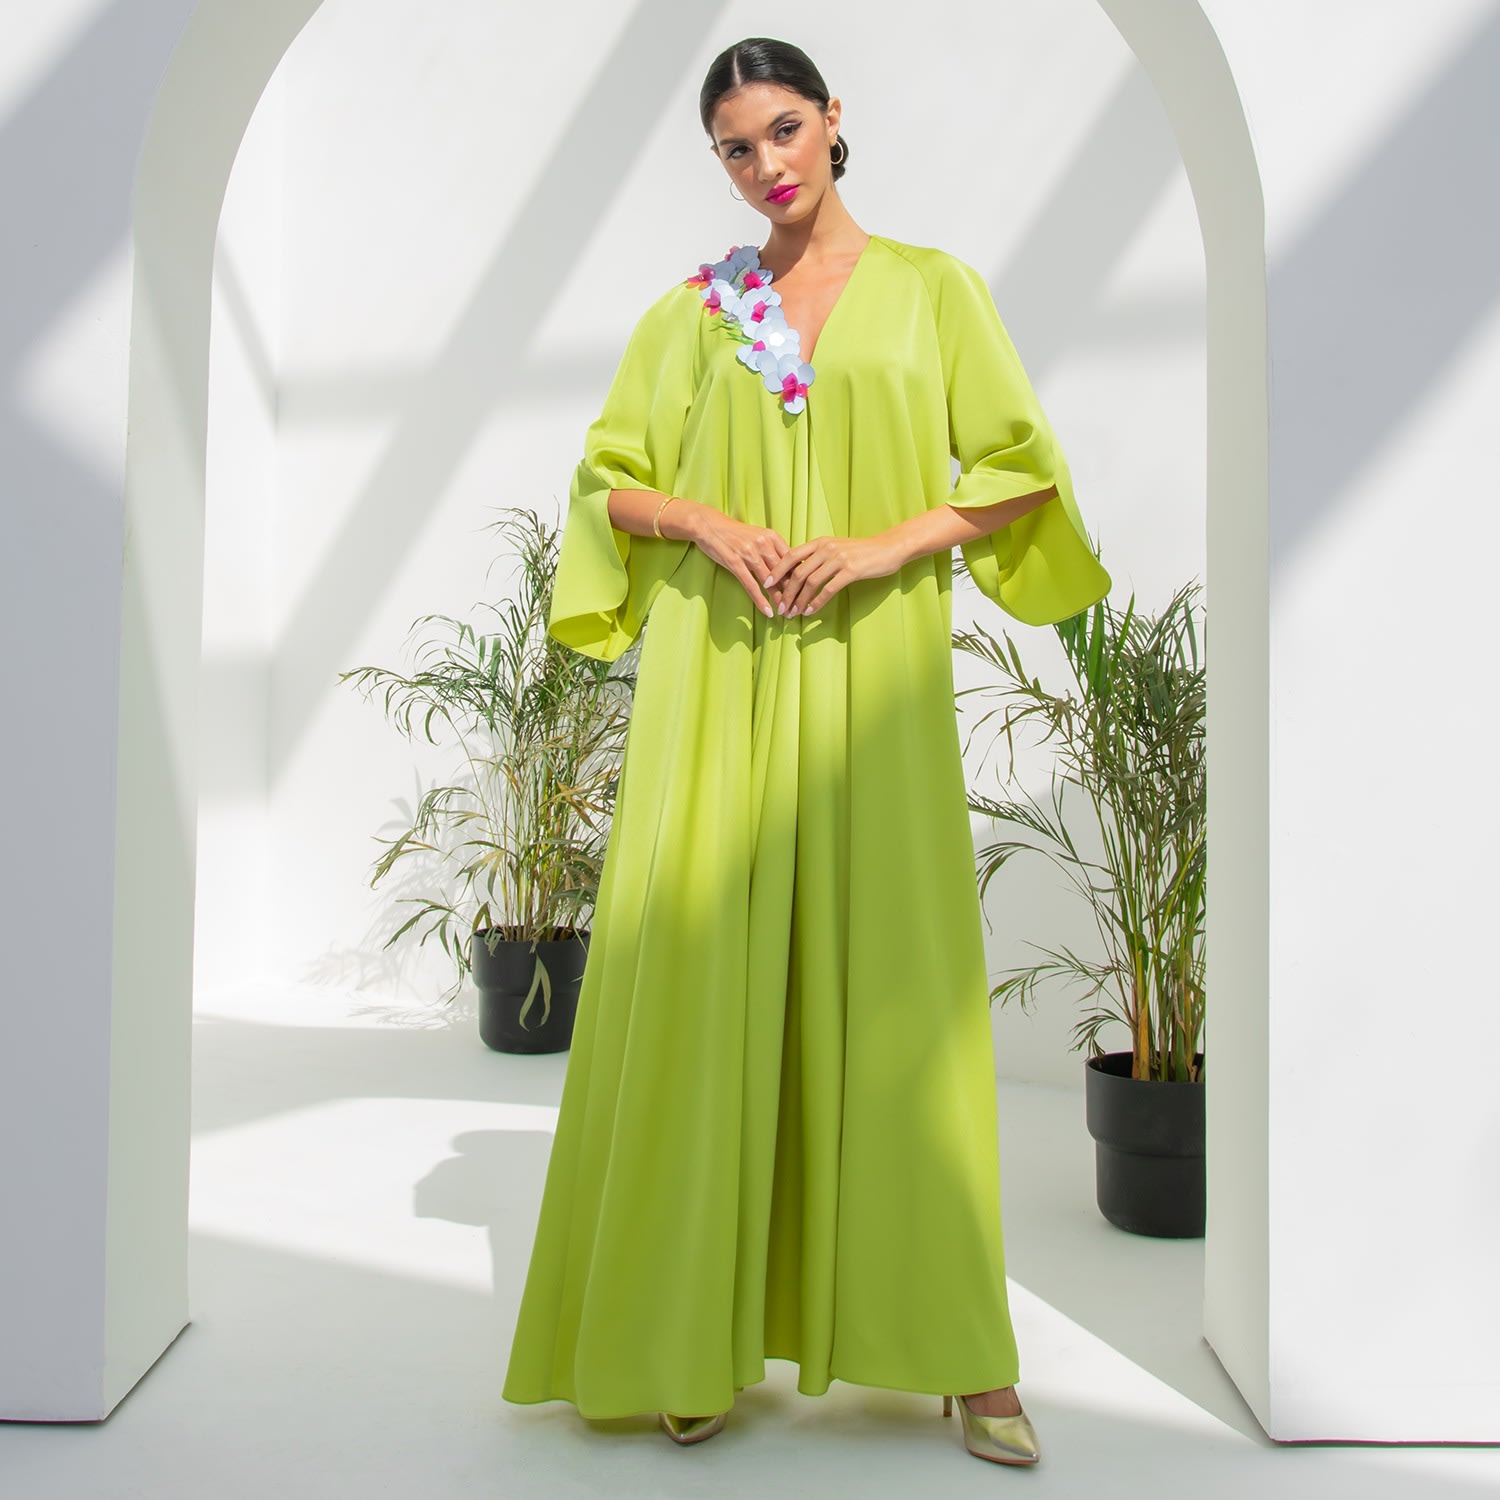 Azzalia Women's Green Classic Flowy Kaftan With On Side Three D Floral Embellishment In Lime Punch